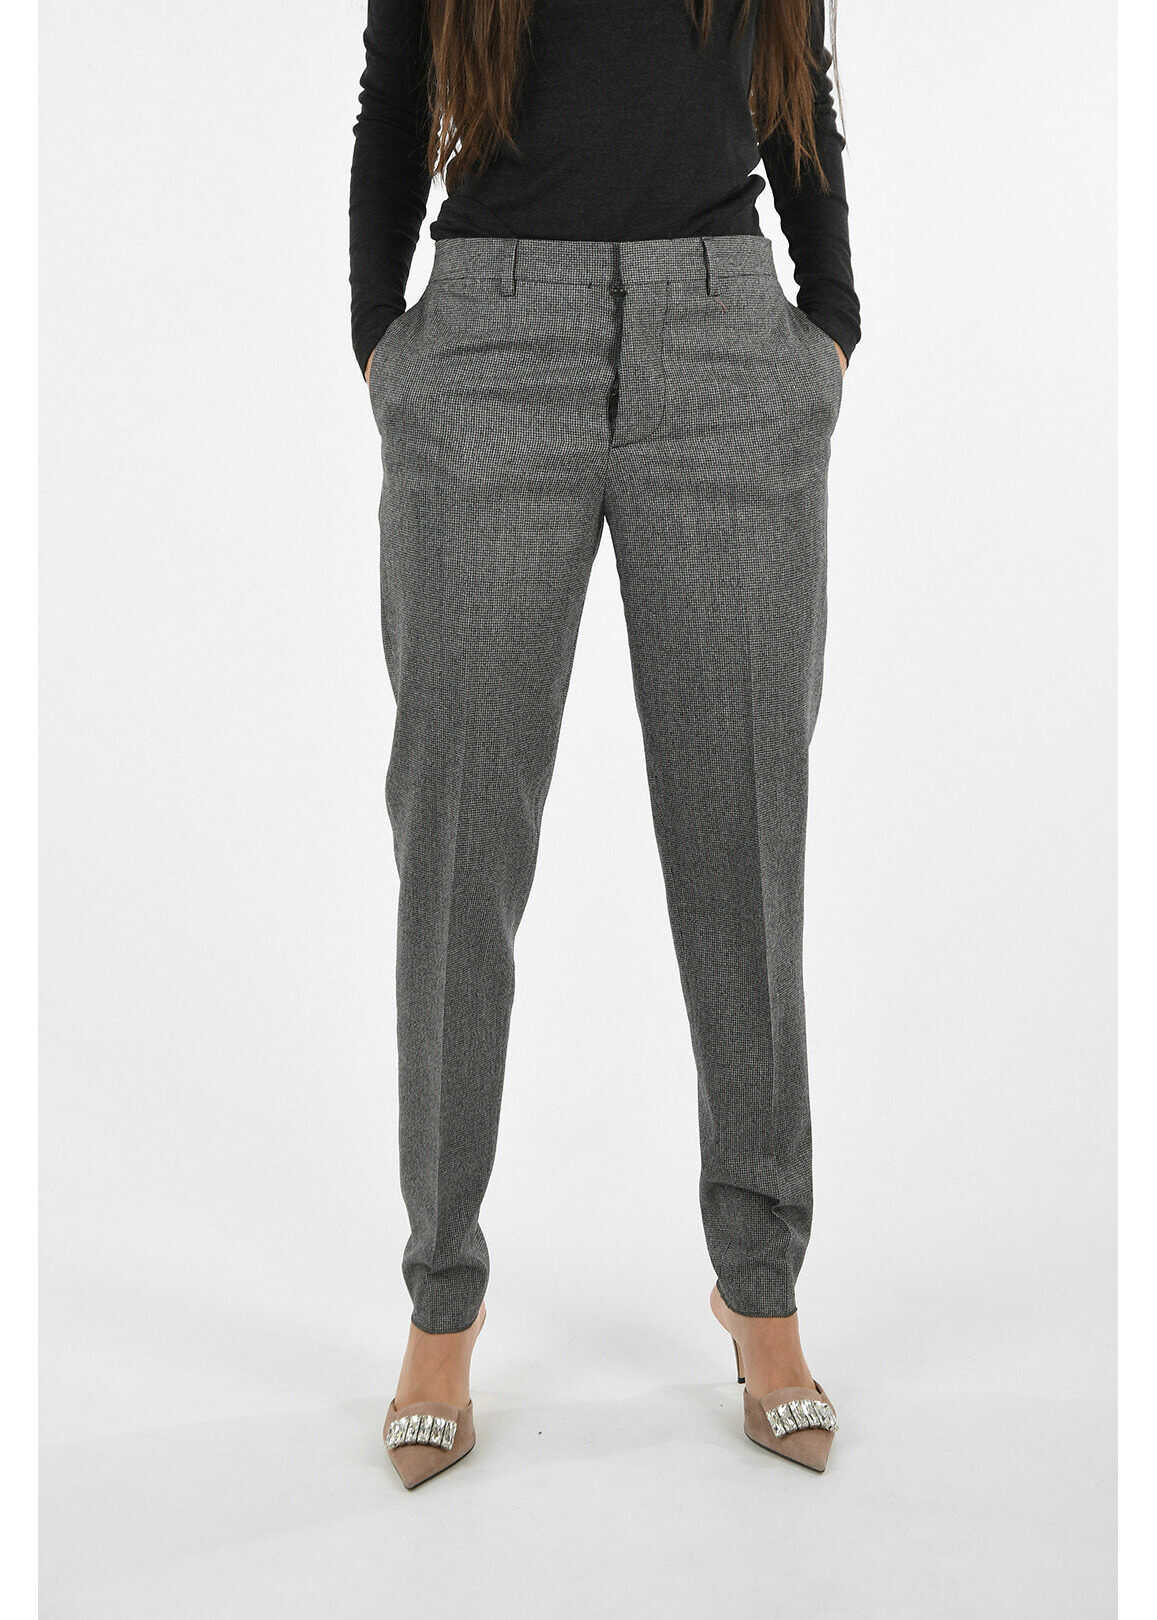 DSQUARED2 Virgin Wool Roxy Fit Pant Gray